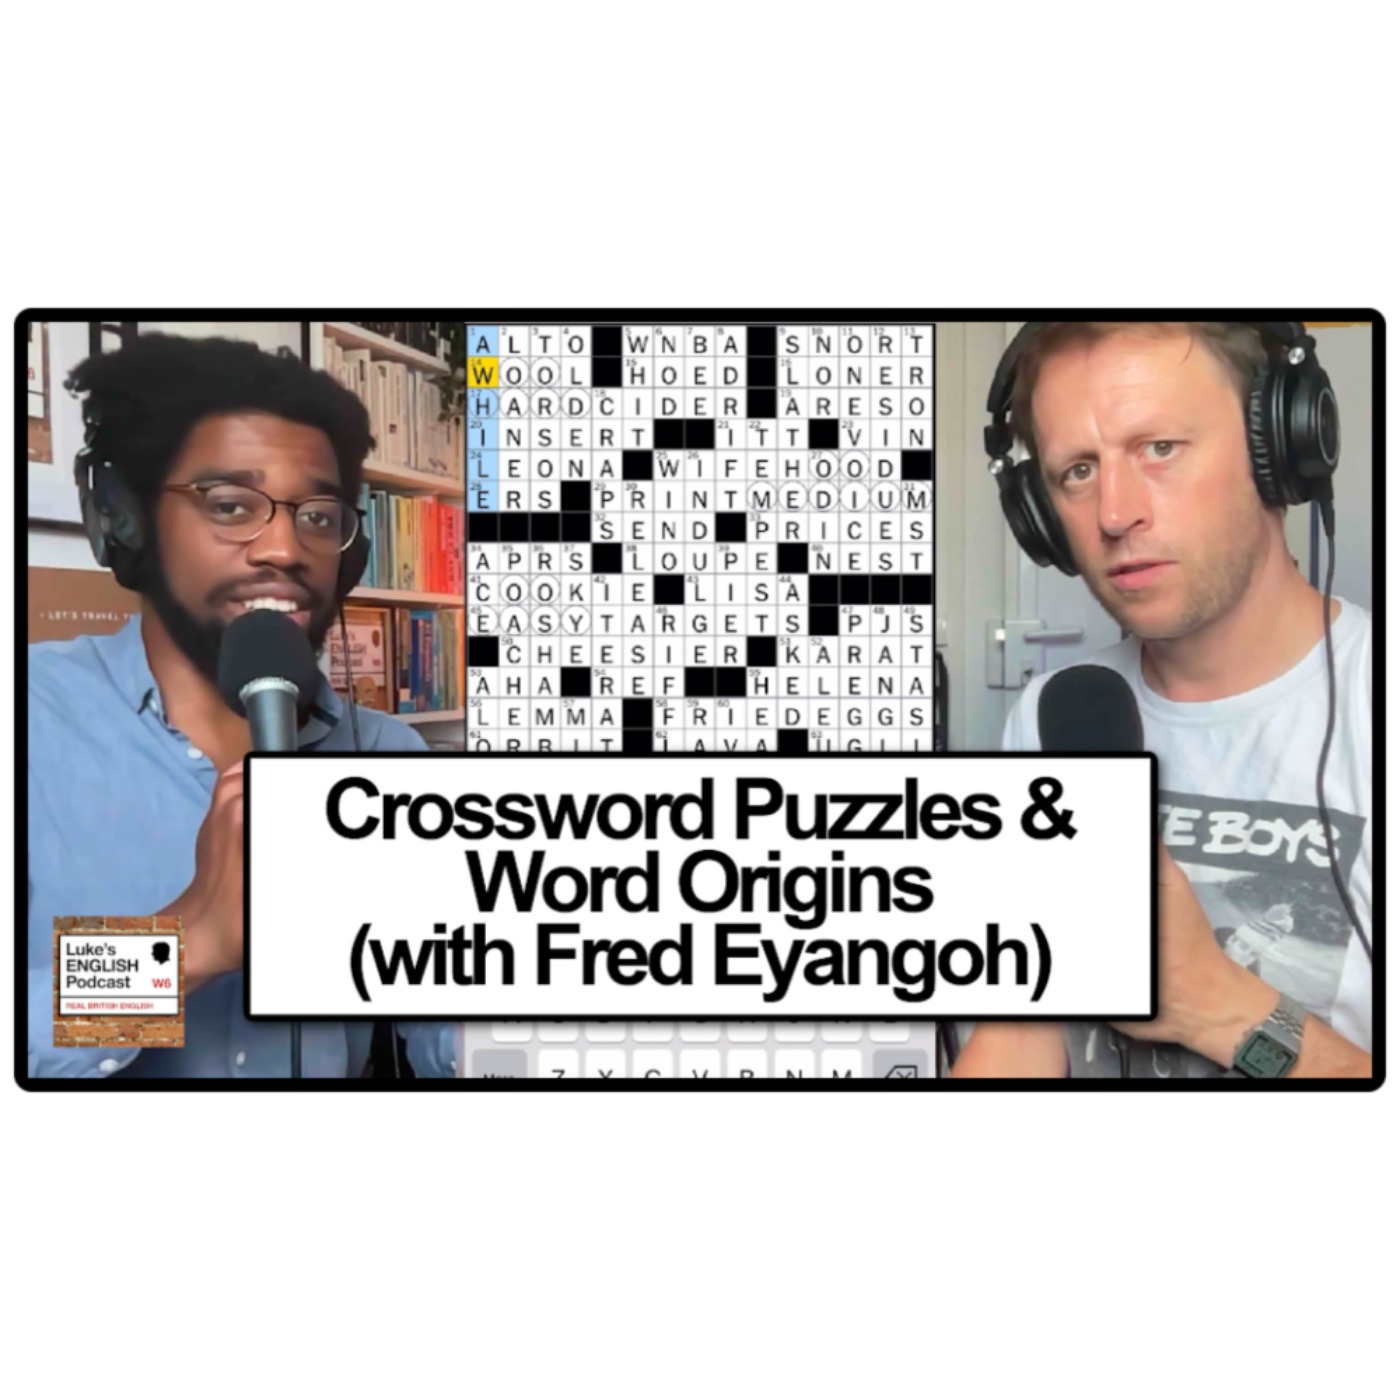 785. Crossword Puzzles & Word Origins (with Fred Eyangoh)